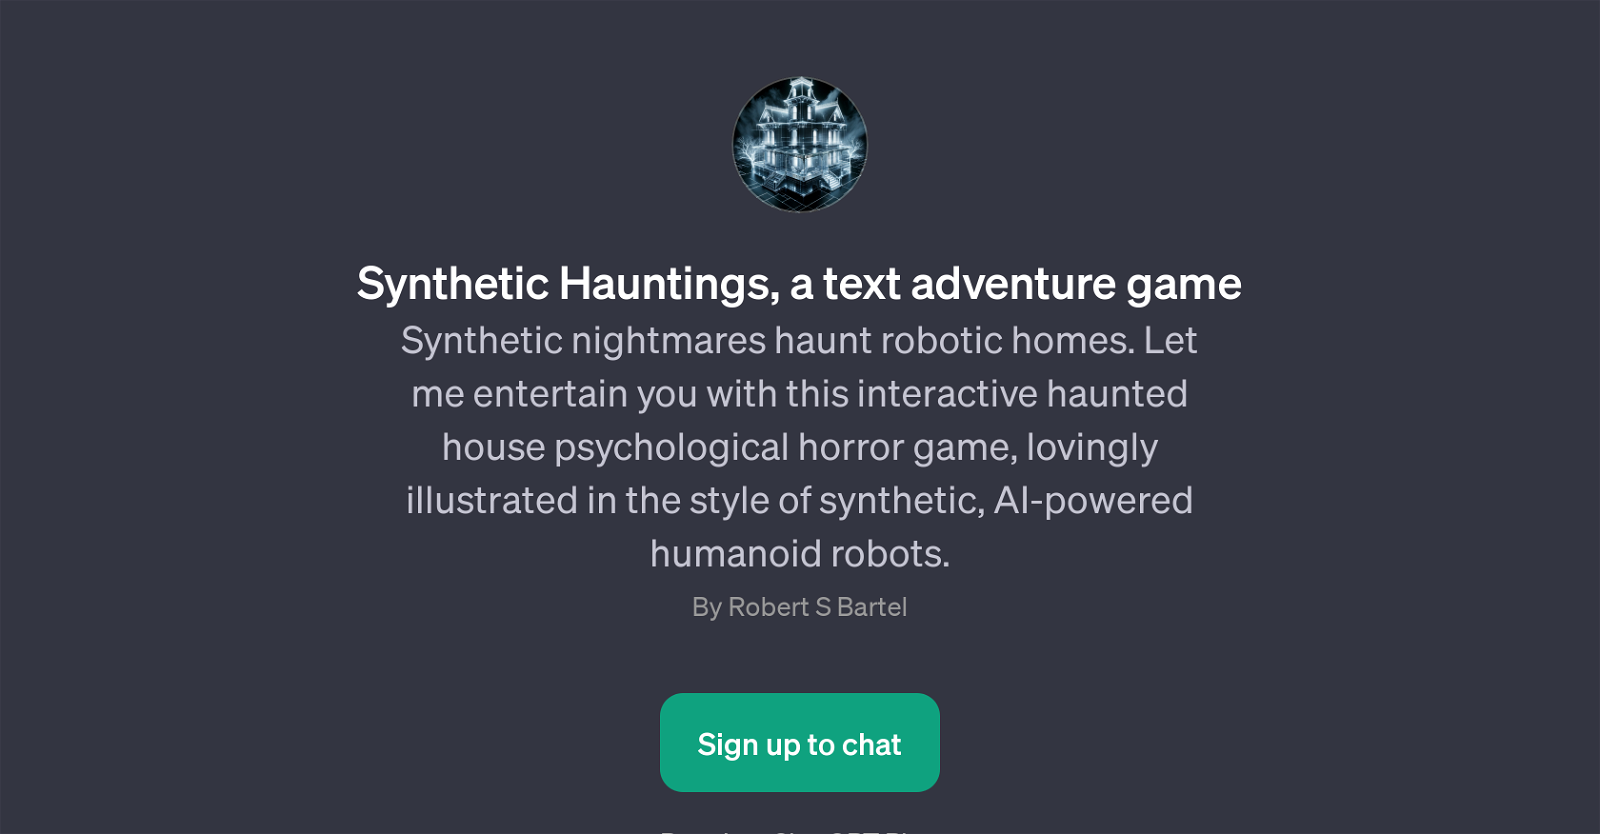 Synthetic Hauntings website